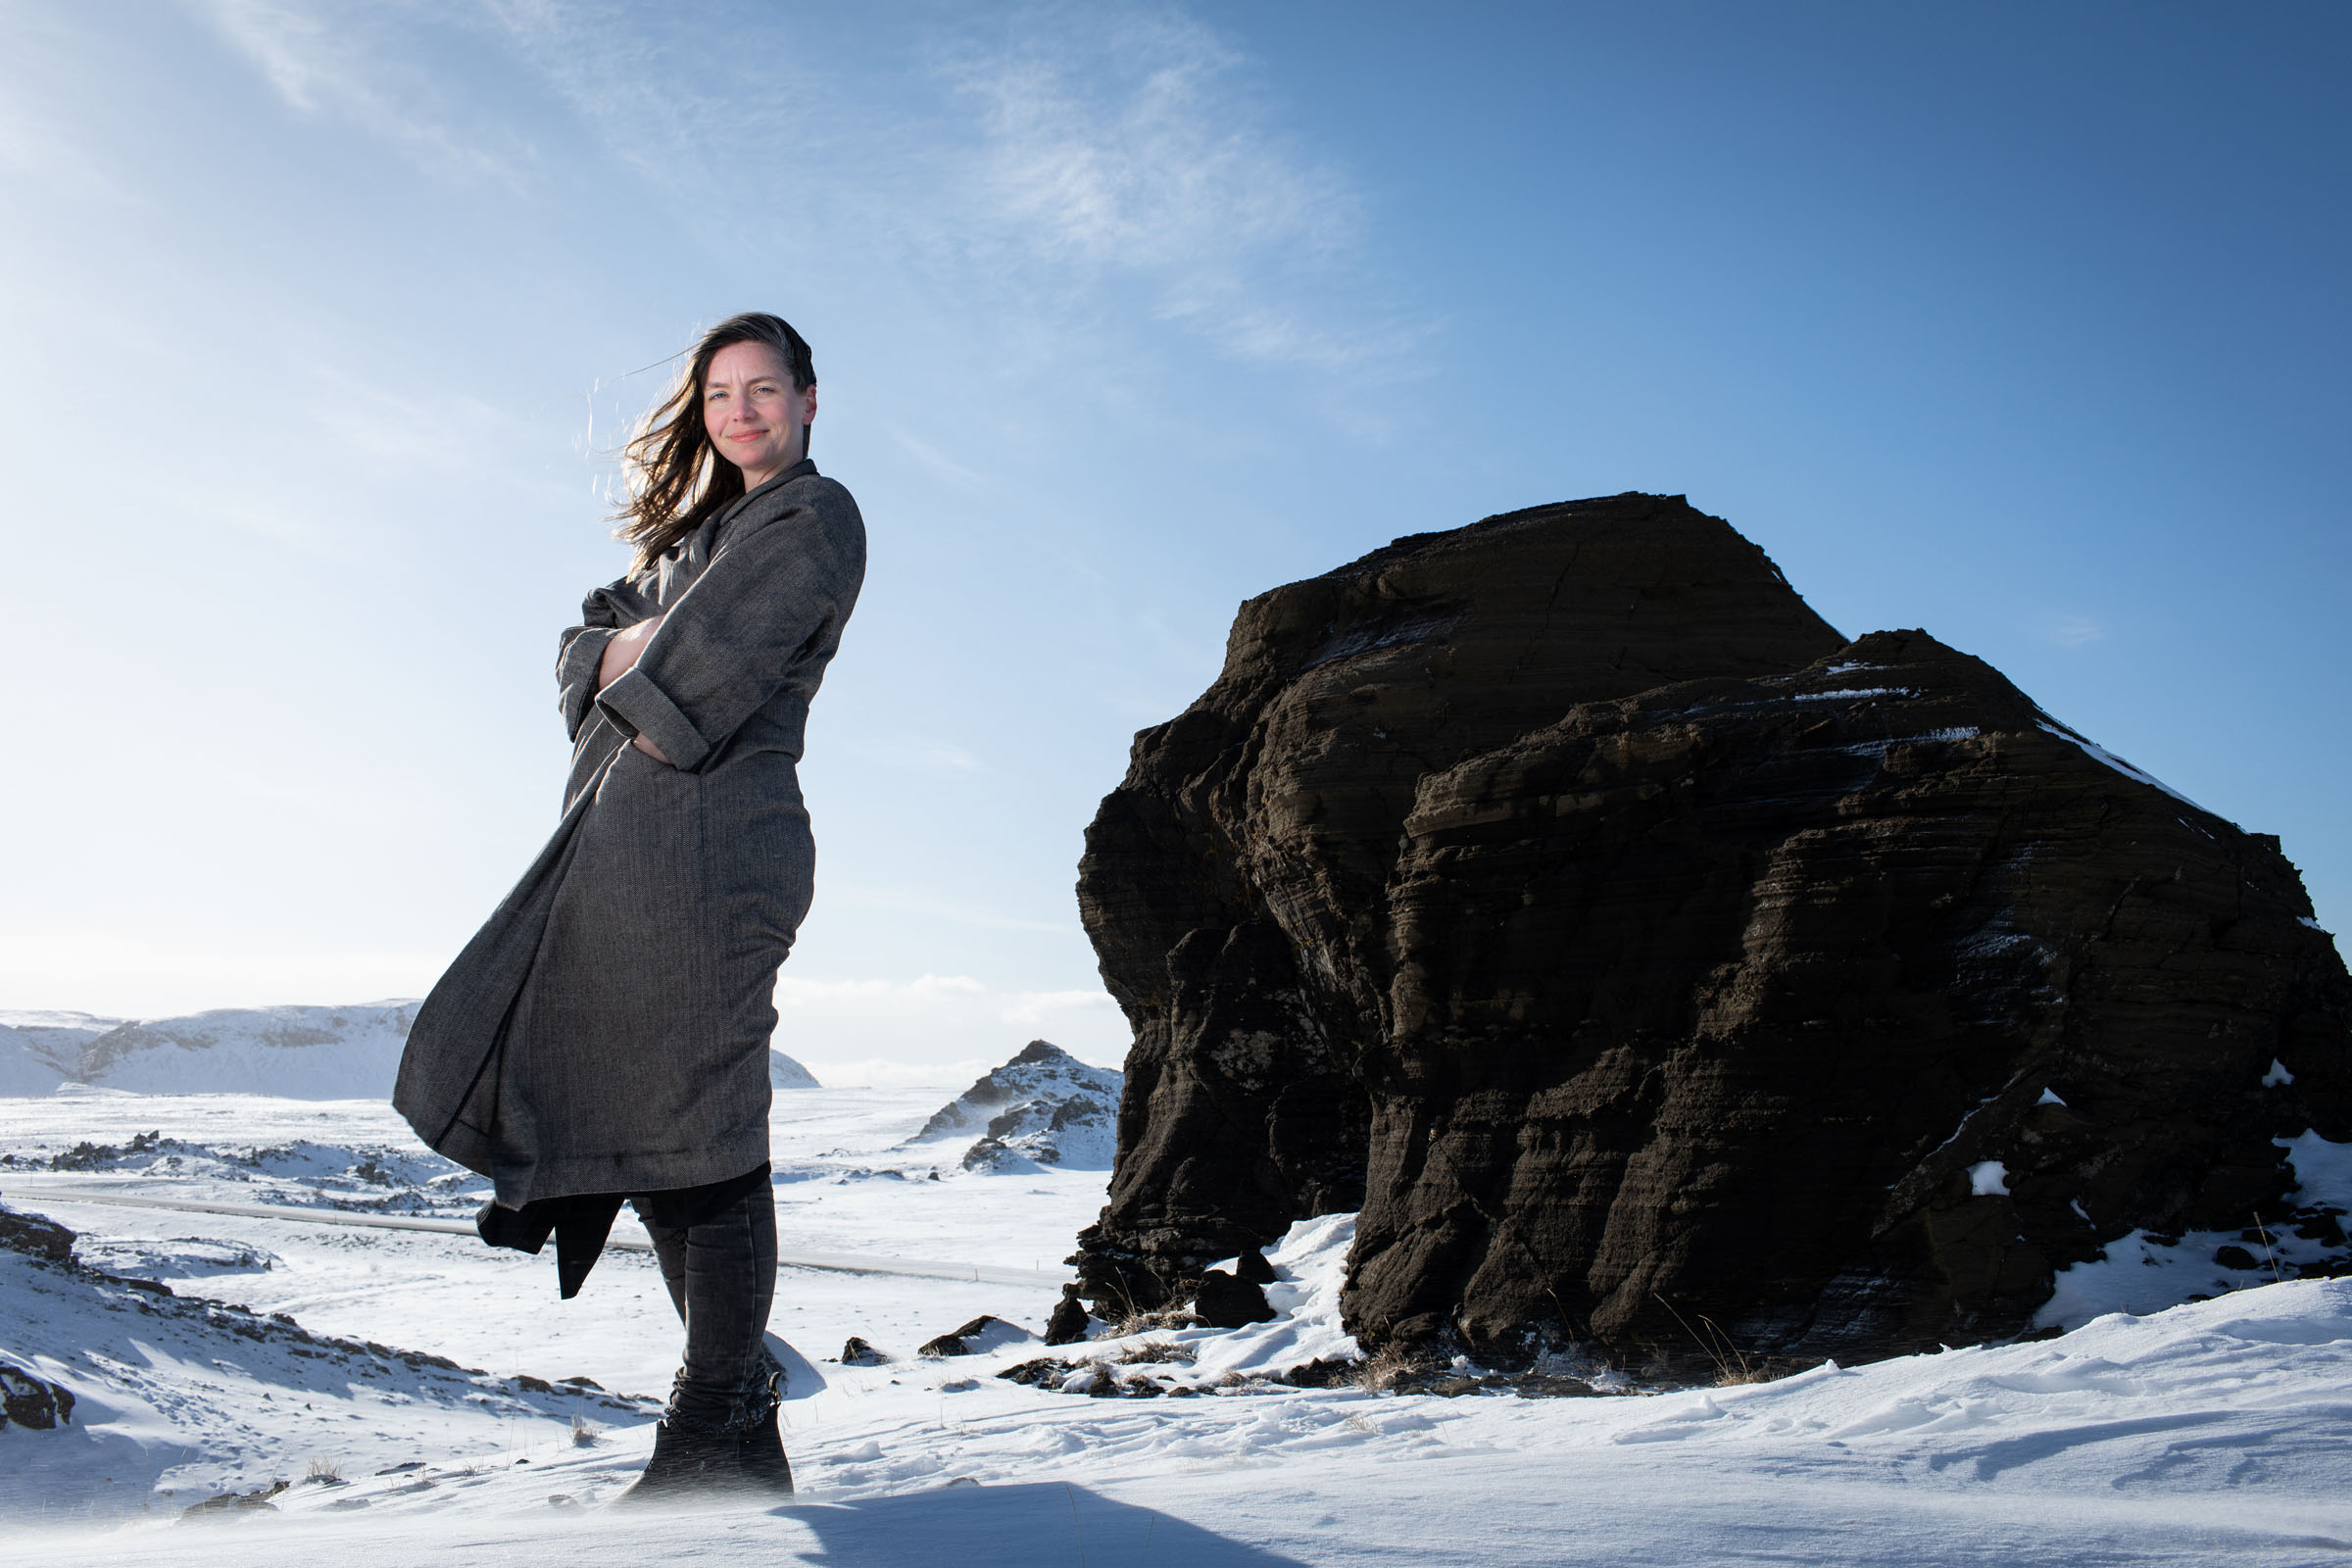 A portrait of Eveline in Iceland by Helen Maybanks